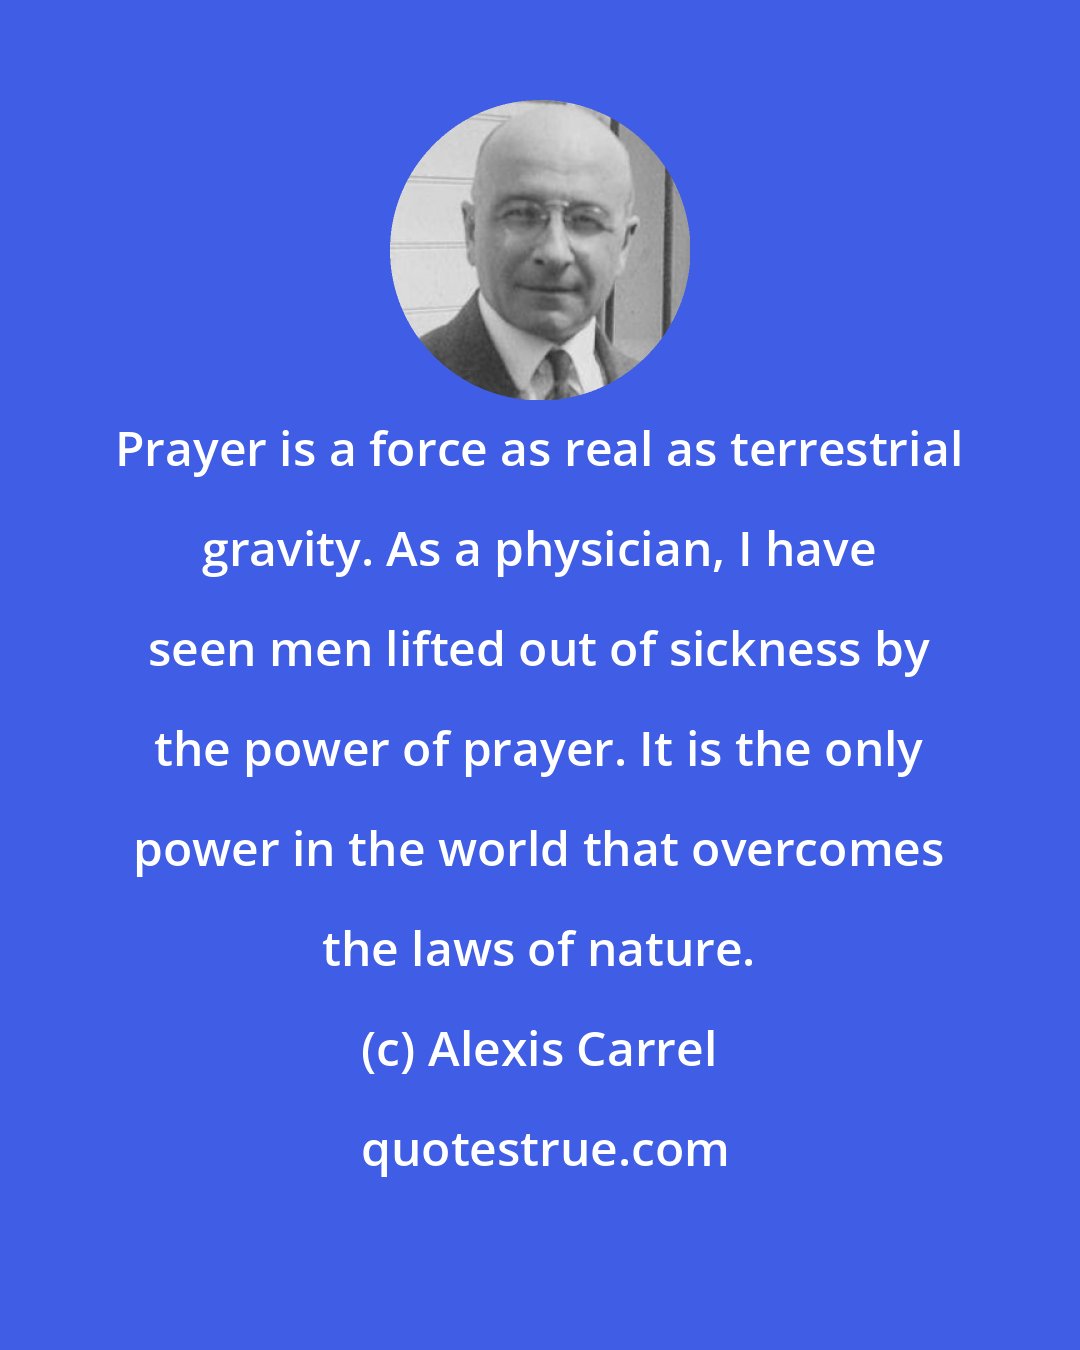 Alexis Carrel: Prayer is a force as real as terrestrial gravity. As a physician, I have seen men lifted out of sickness by the power of prayer. It is the only power in the world that overcomes the laws of nature.